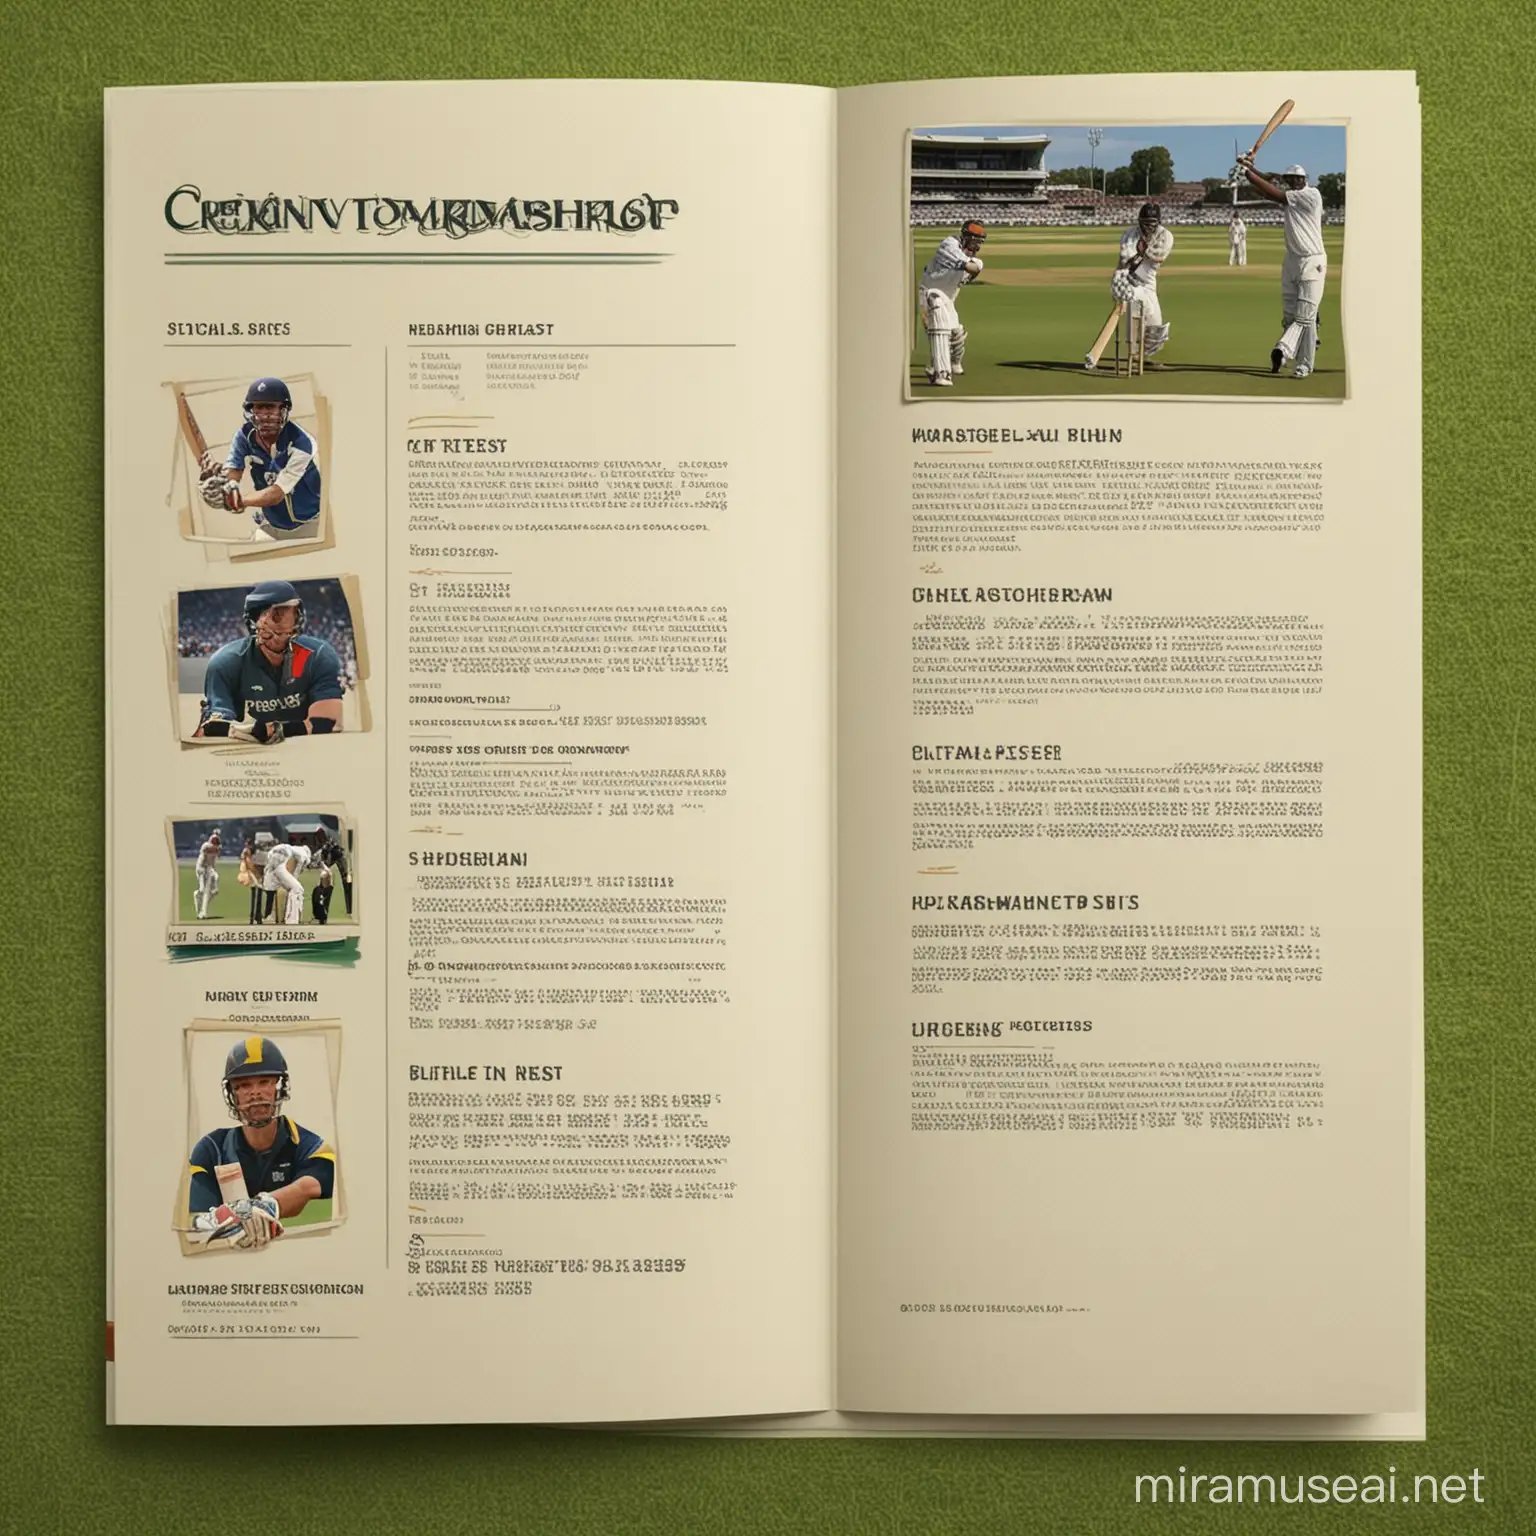 As a graphics expert using Adobe Photoshop or Illustrator, you will be working to enhance the aesthetics of our multi-page sports program for a cricket tournament. Here's what we need:

- Upgrade all sections: I need all the pages of the sports program - the Home page, Schedule page, and the Team/Player page - to be polished.
- HomePage Makeover: The design of the Home page needs a revamp. I'm looking for someone with the ability to bring a modern and minimalist style to the design. If you're proficient in UX and layout design, your skills are necessary.
- Creativity: The use of other tools than Adobe Photoshop or Illustrator will be considered, only if suggested and agreed upon prior to beginning work.

With a strong graphic design background, coupled with your experience in sports program design, you'll have the expertise we need. Let's enhance the cricket tournament experience together!